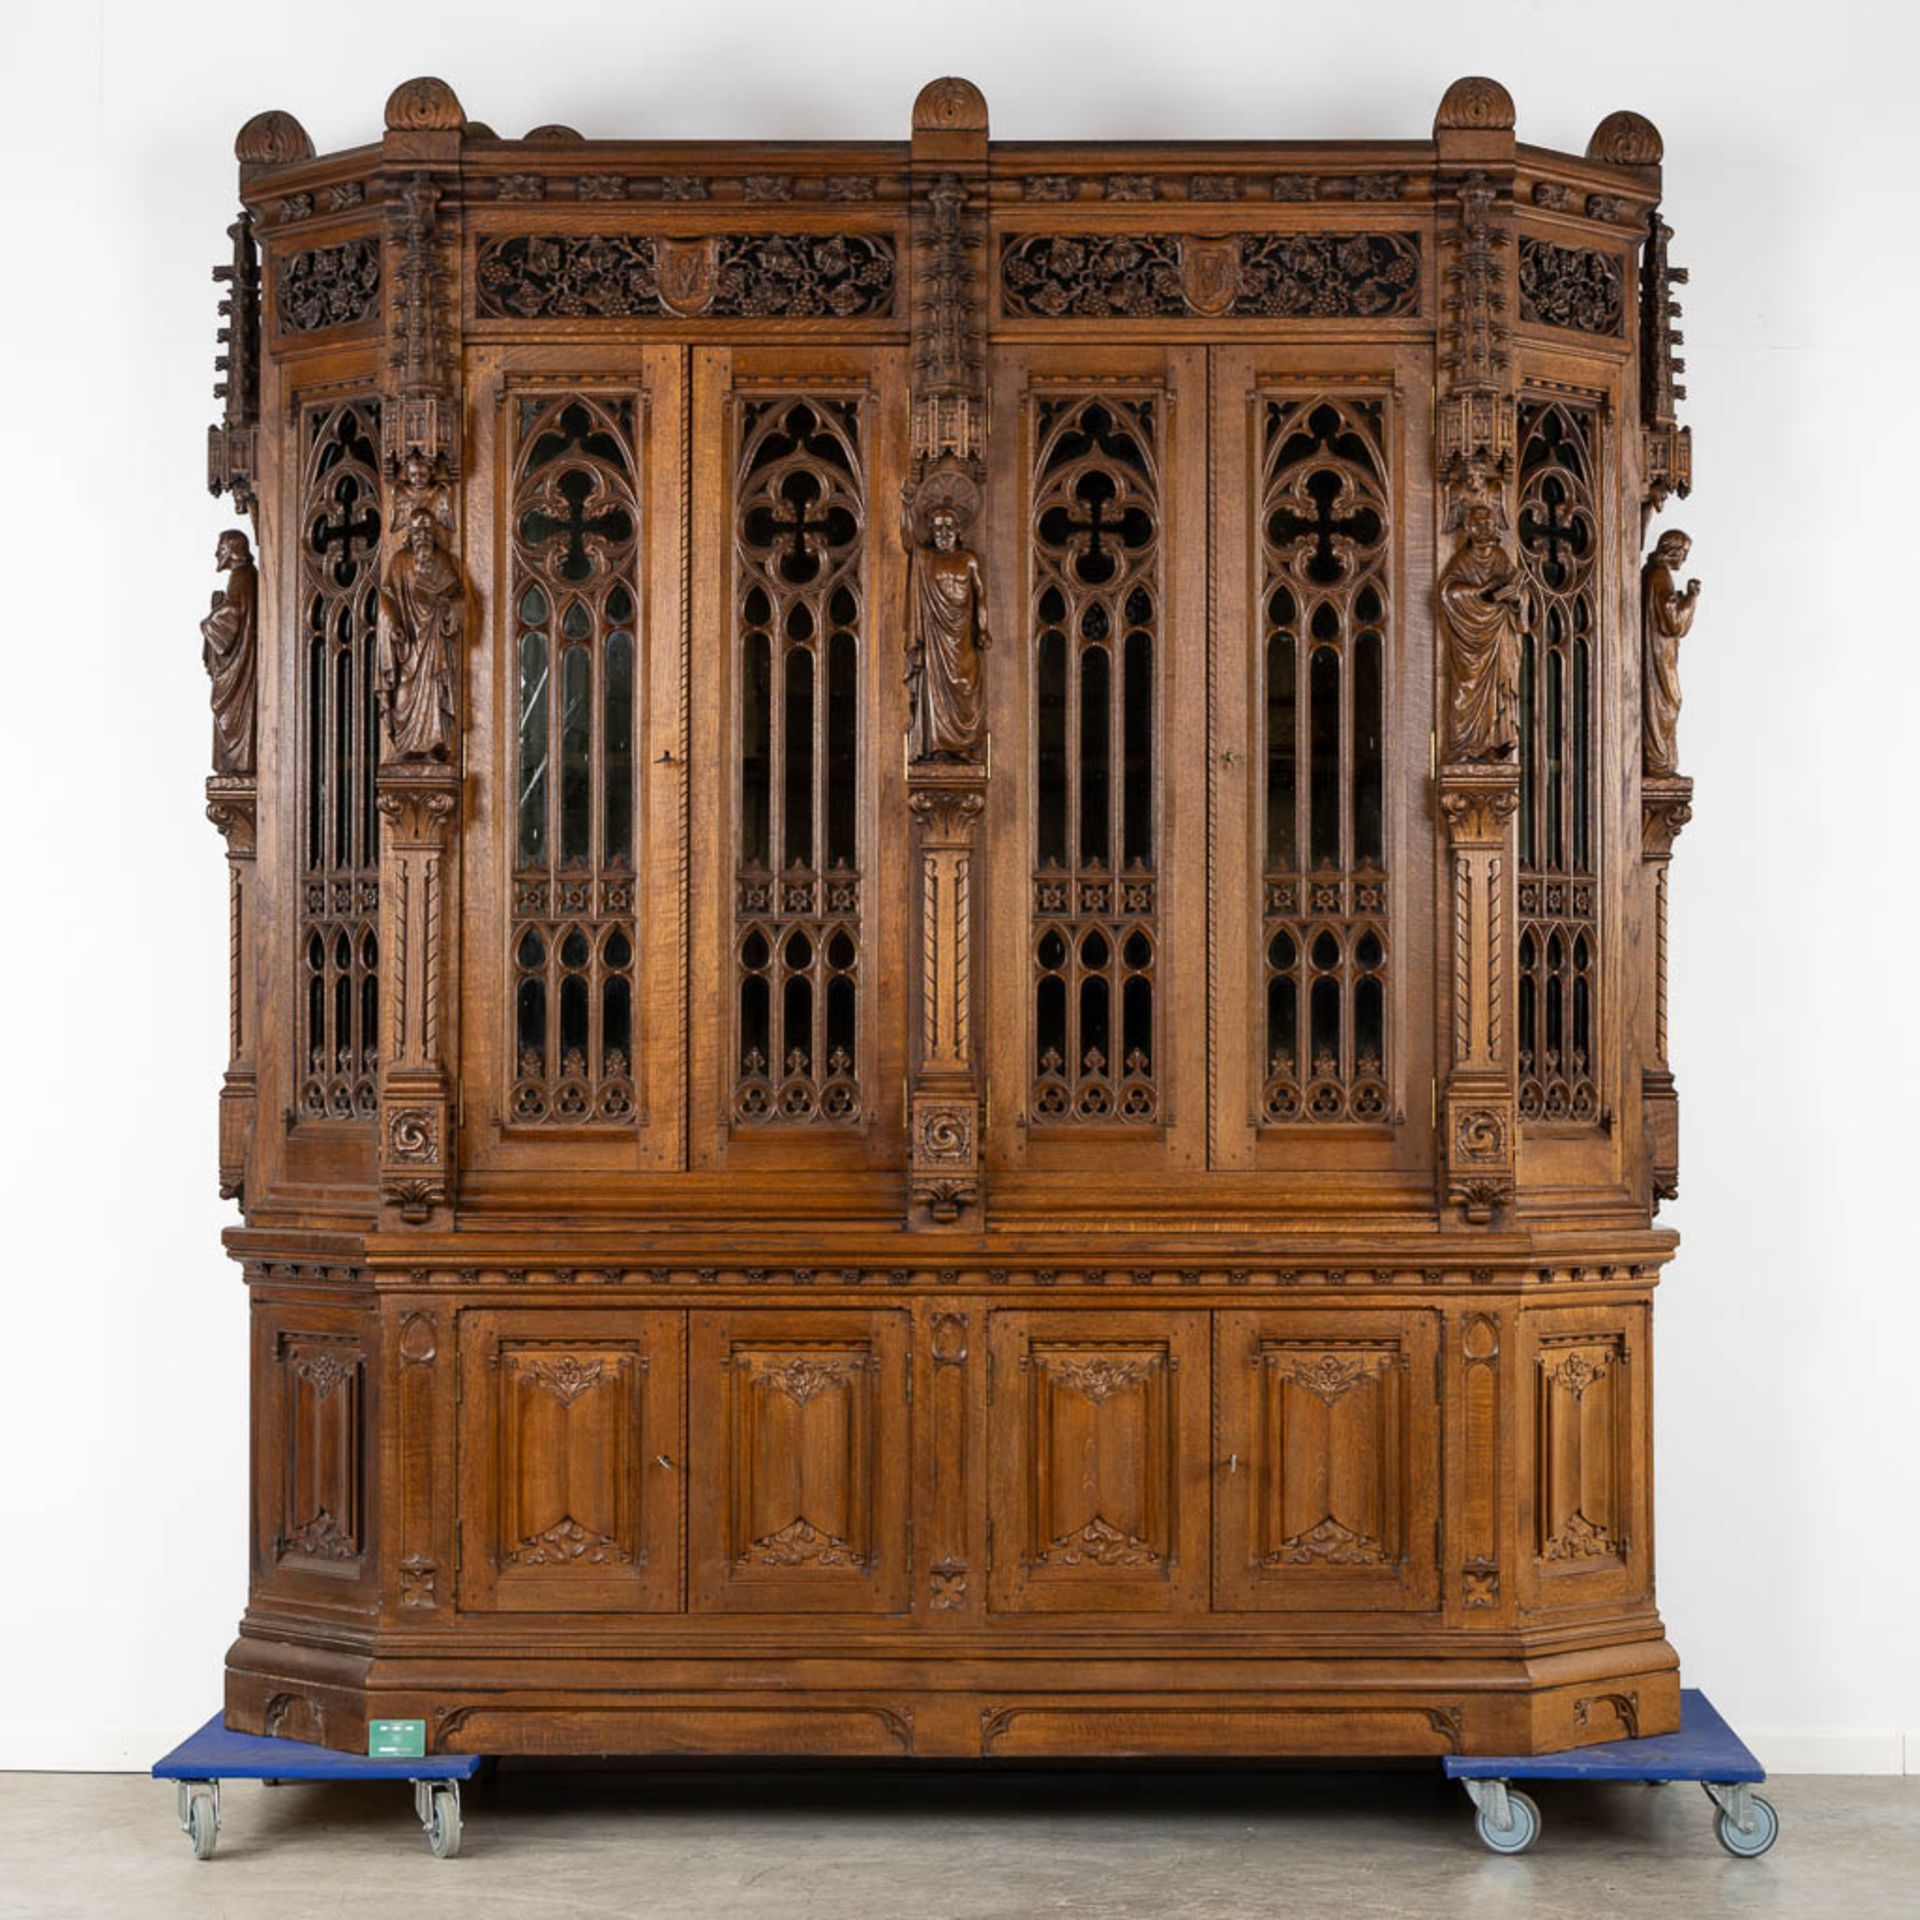 An exceptionally sculptured Gothic Revival library. Circa 1900. (L:62 x W:236 x H:264 cm) - Image 2 of 19